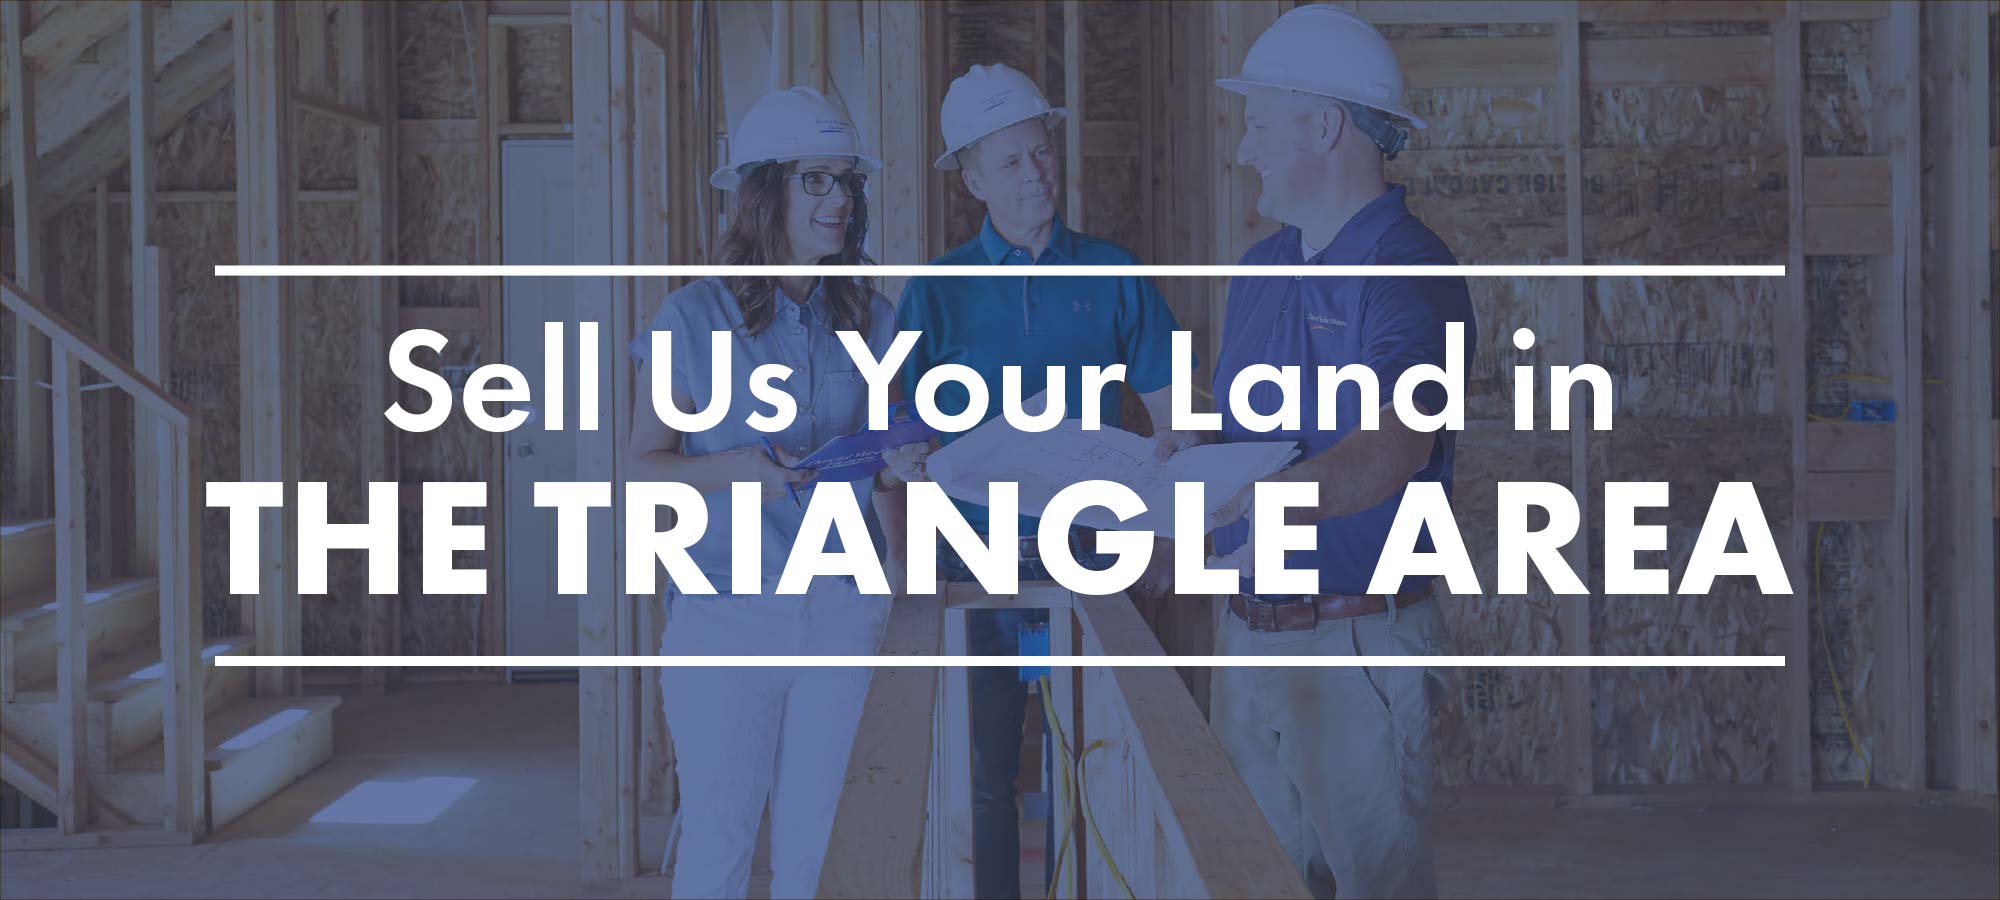 Sell Us Your Land in the Triangle Area